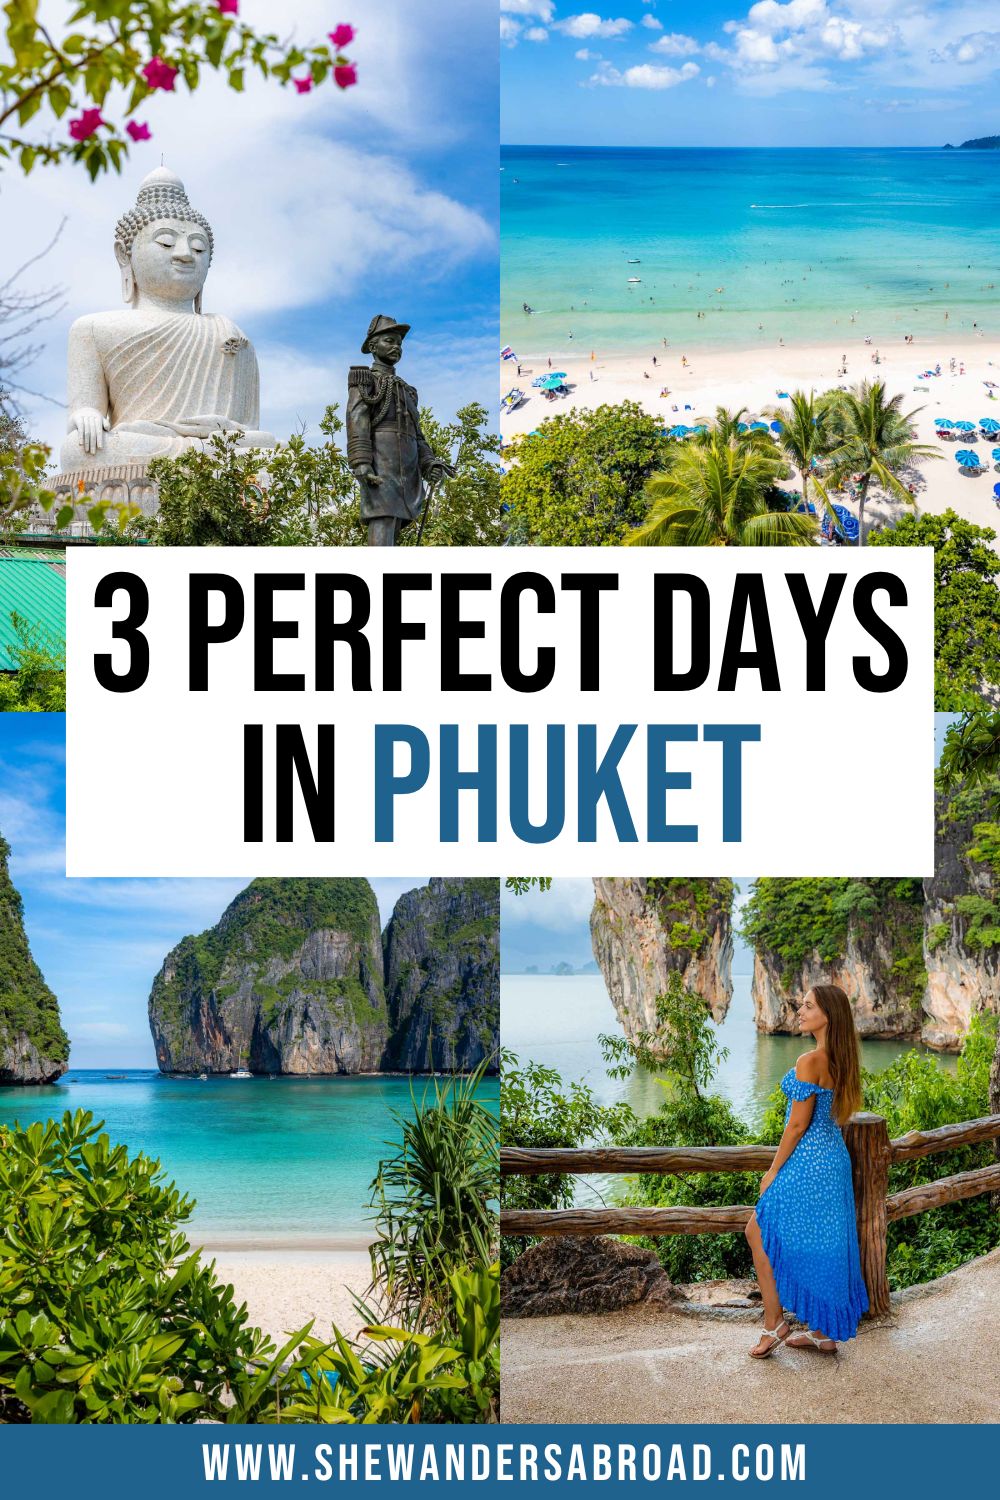 The Ultimate 3 Day Phuket Itinerary for First-Timers